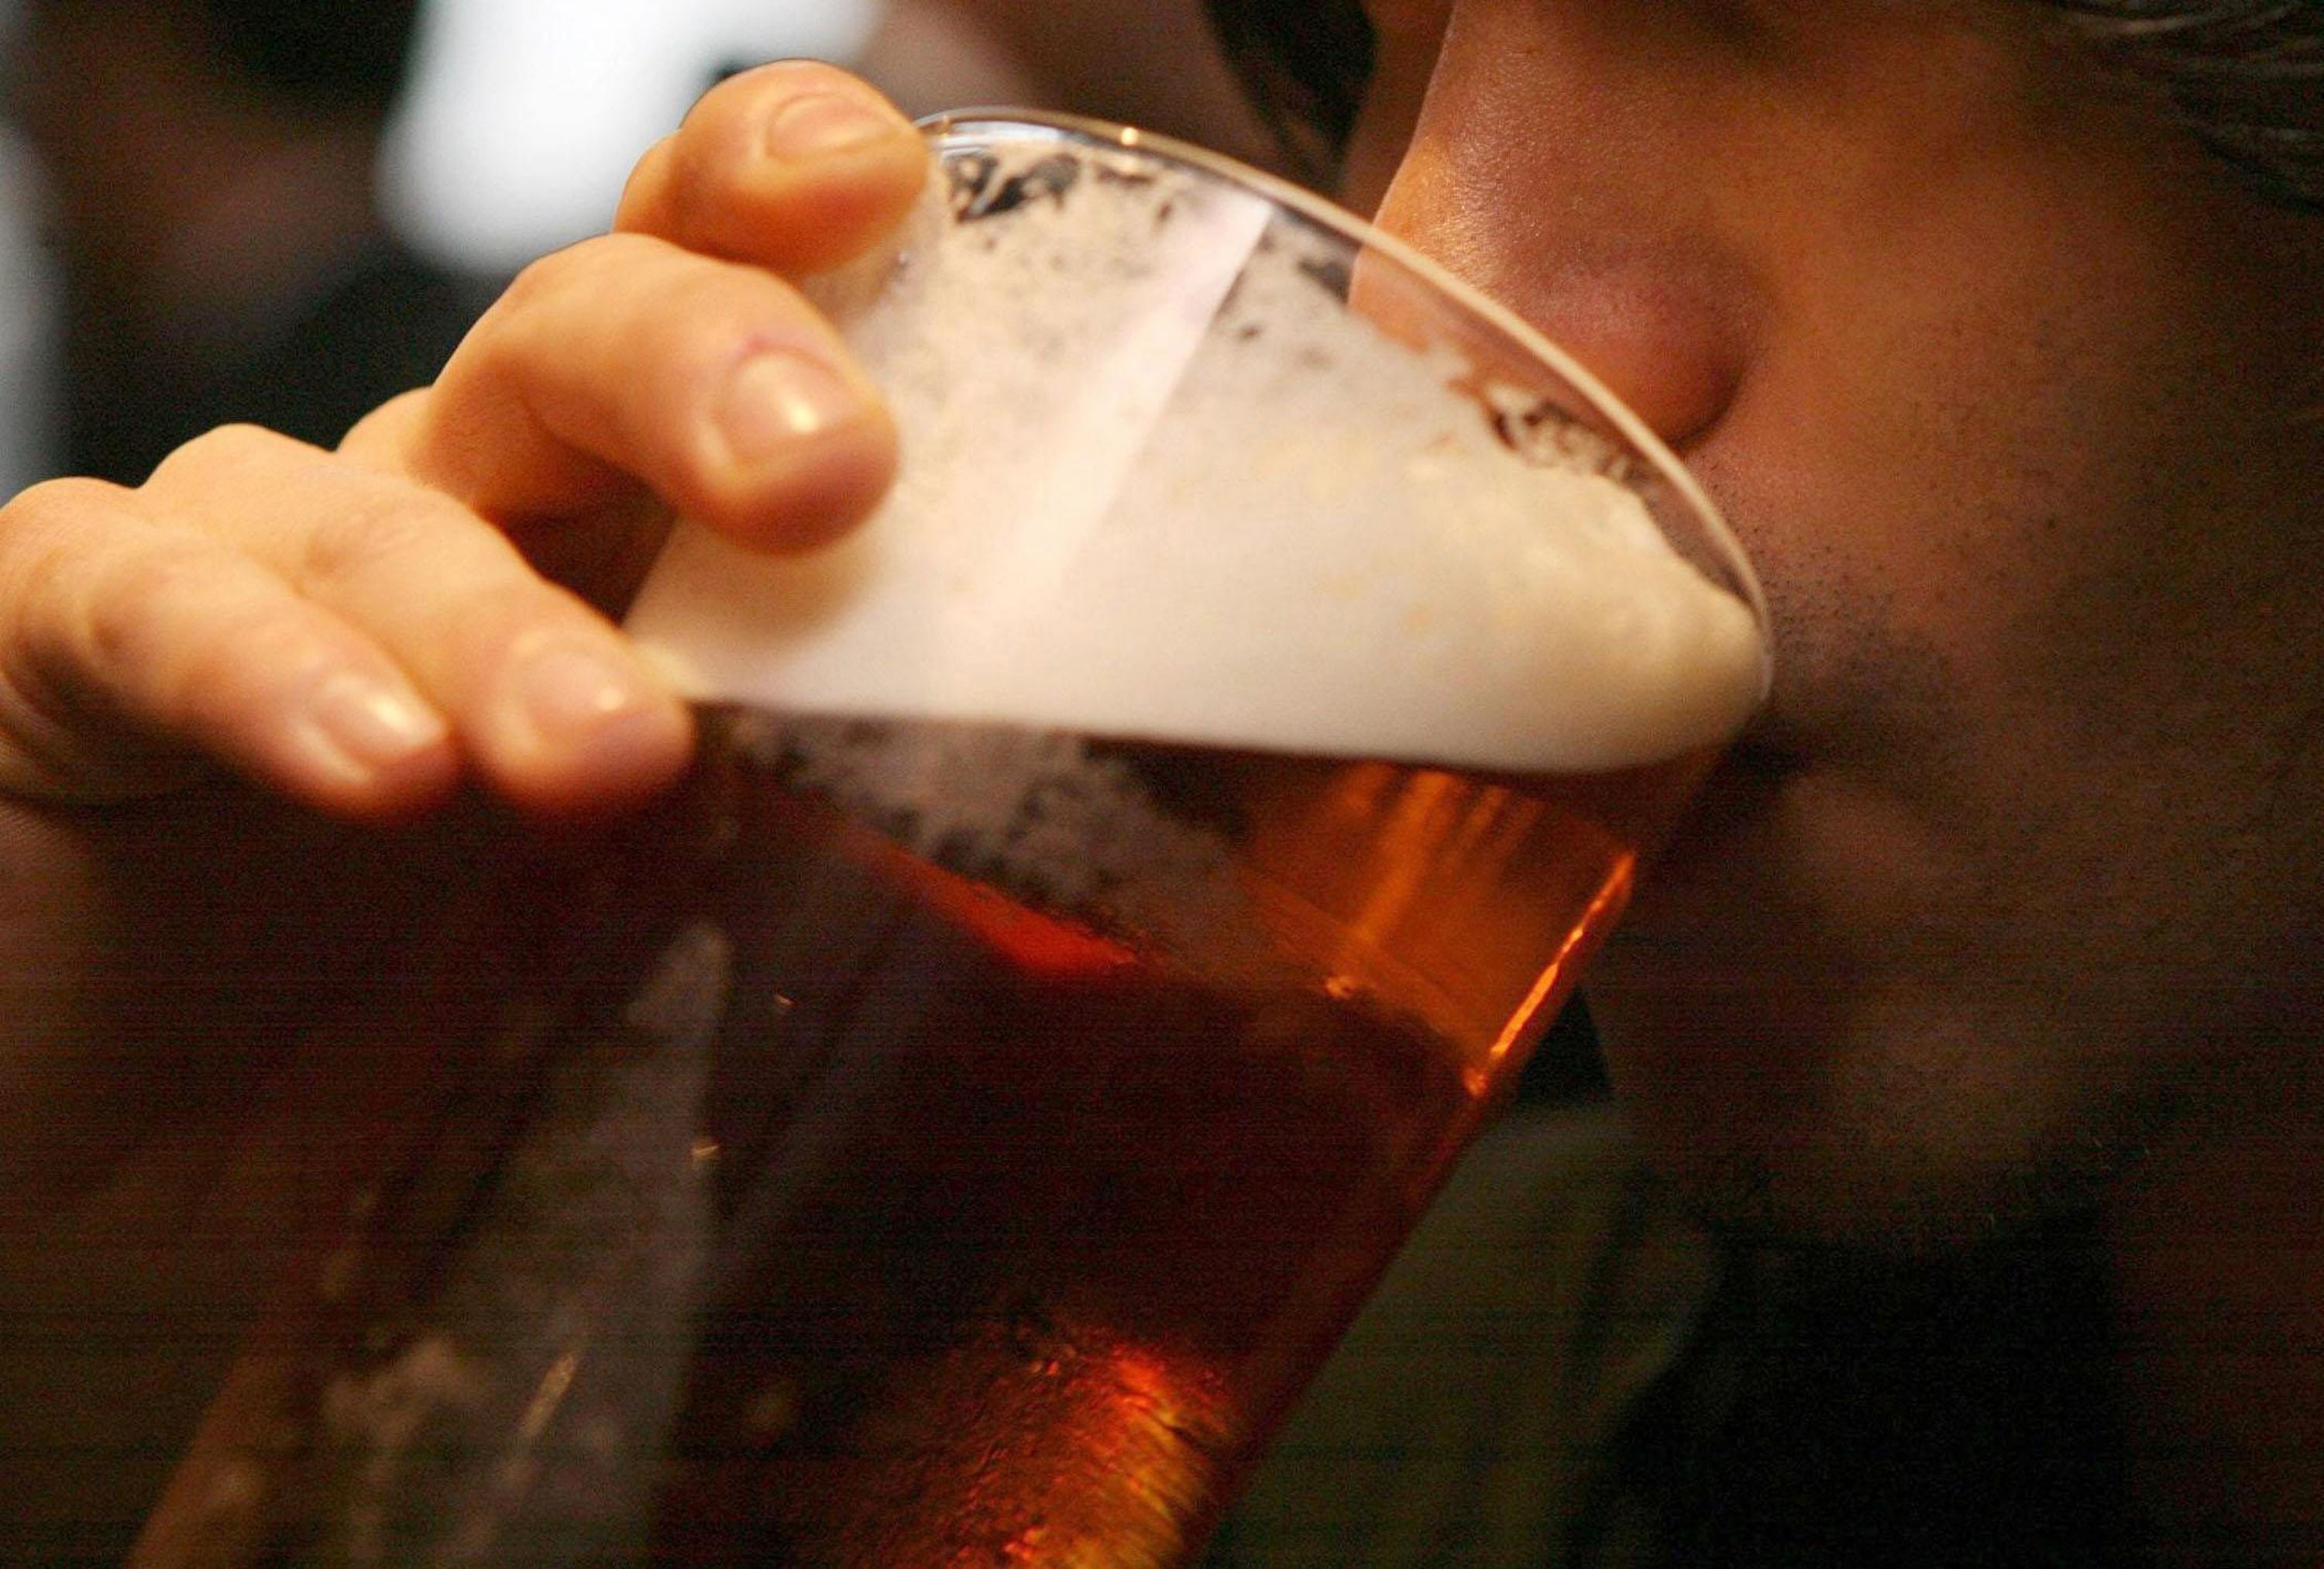 Heavier drinking and less physical activity have contributed to the rise